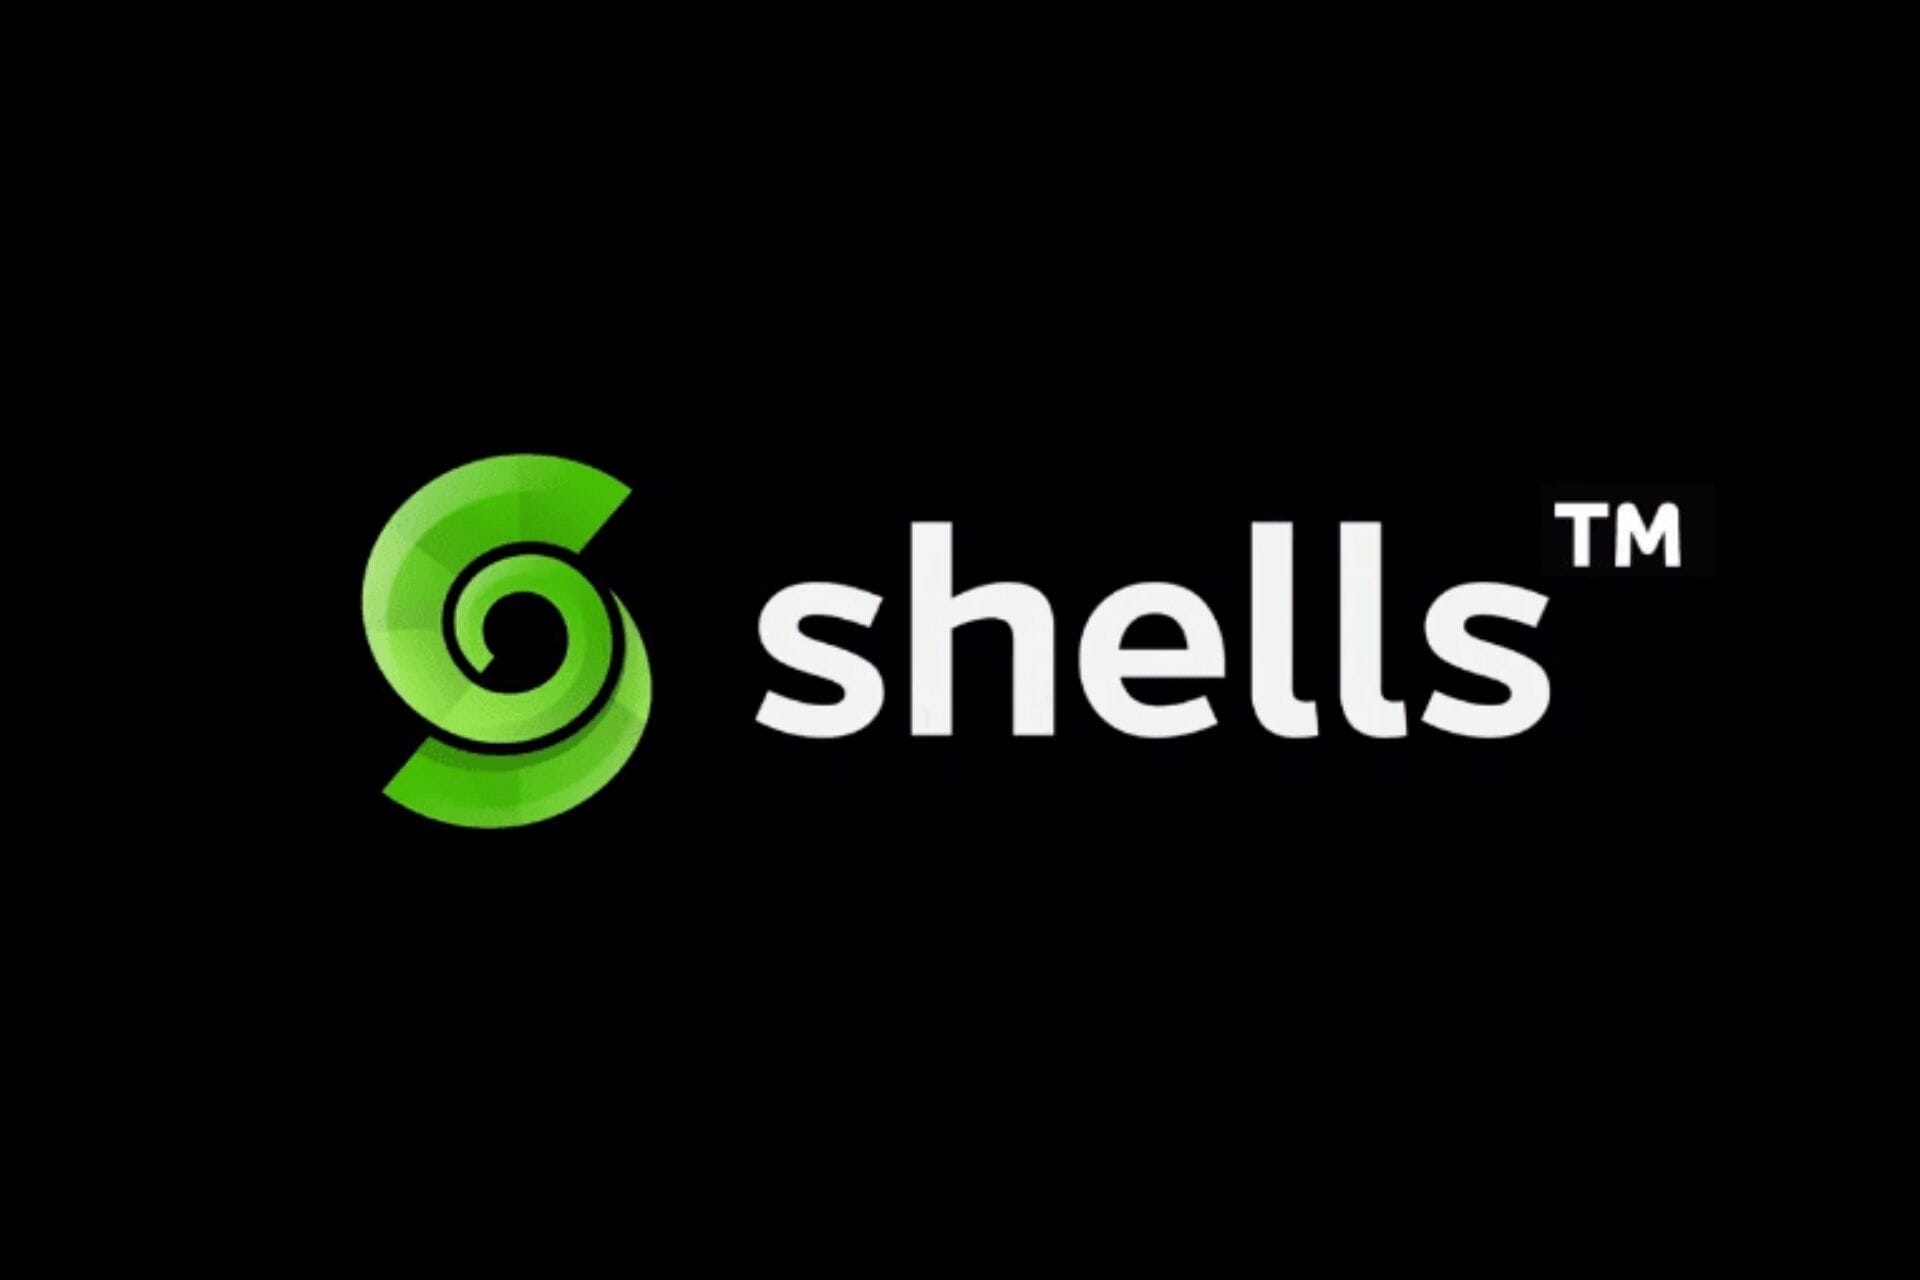 Shells helps you transform any device in a virtual desktop